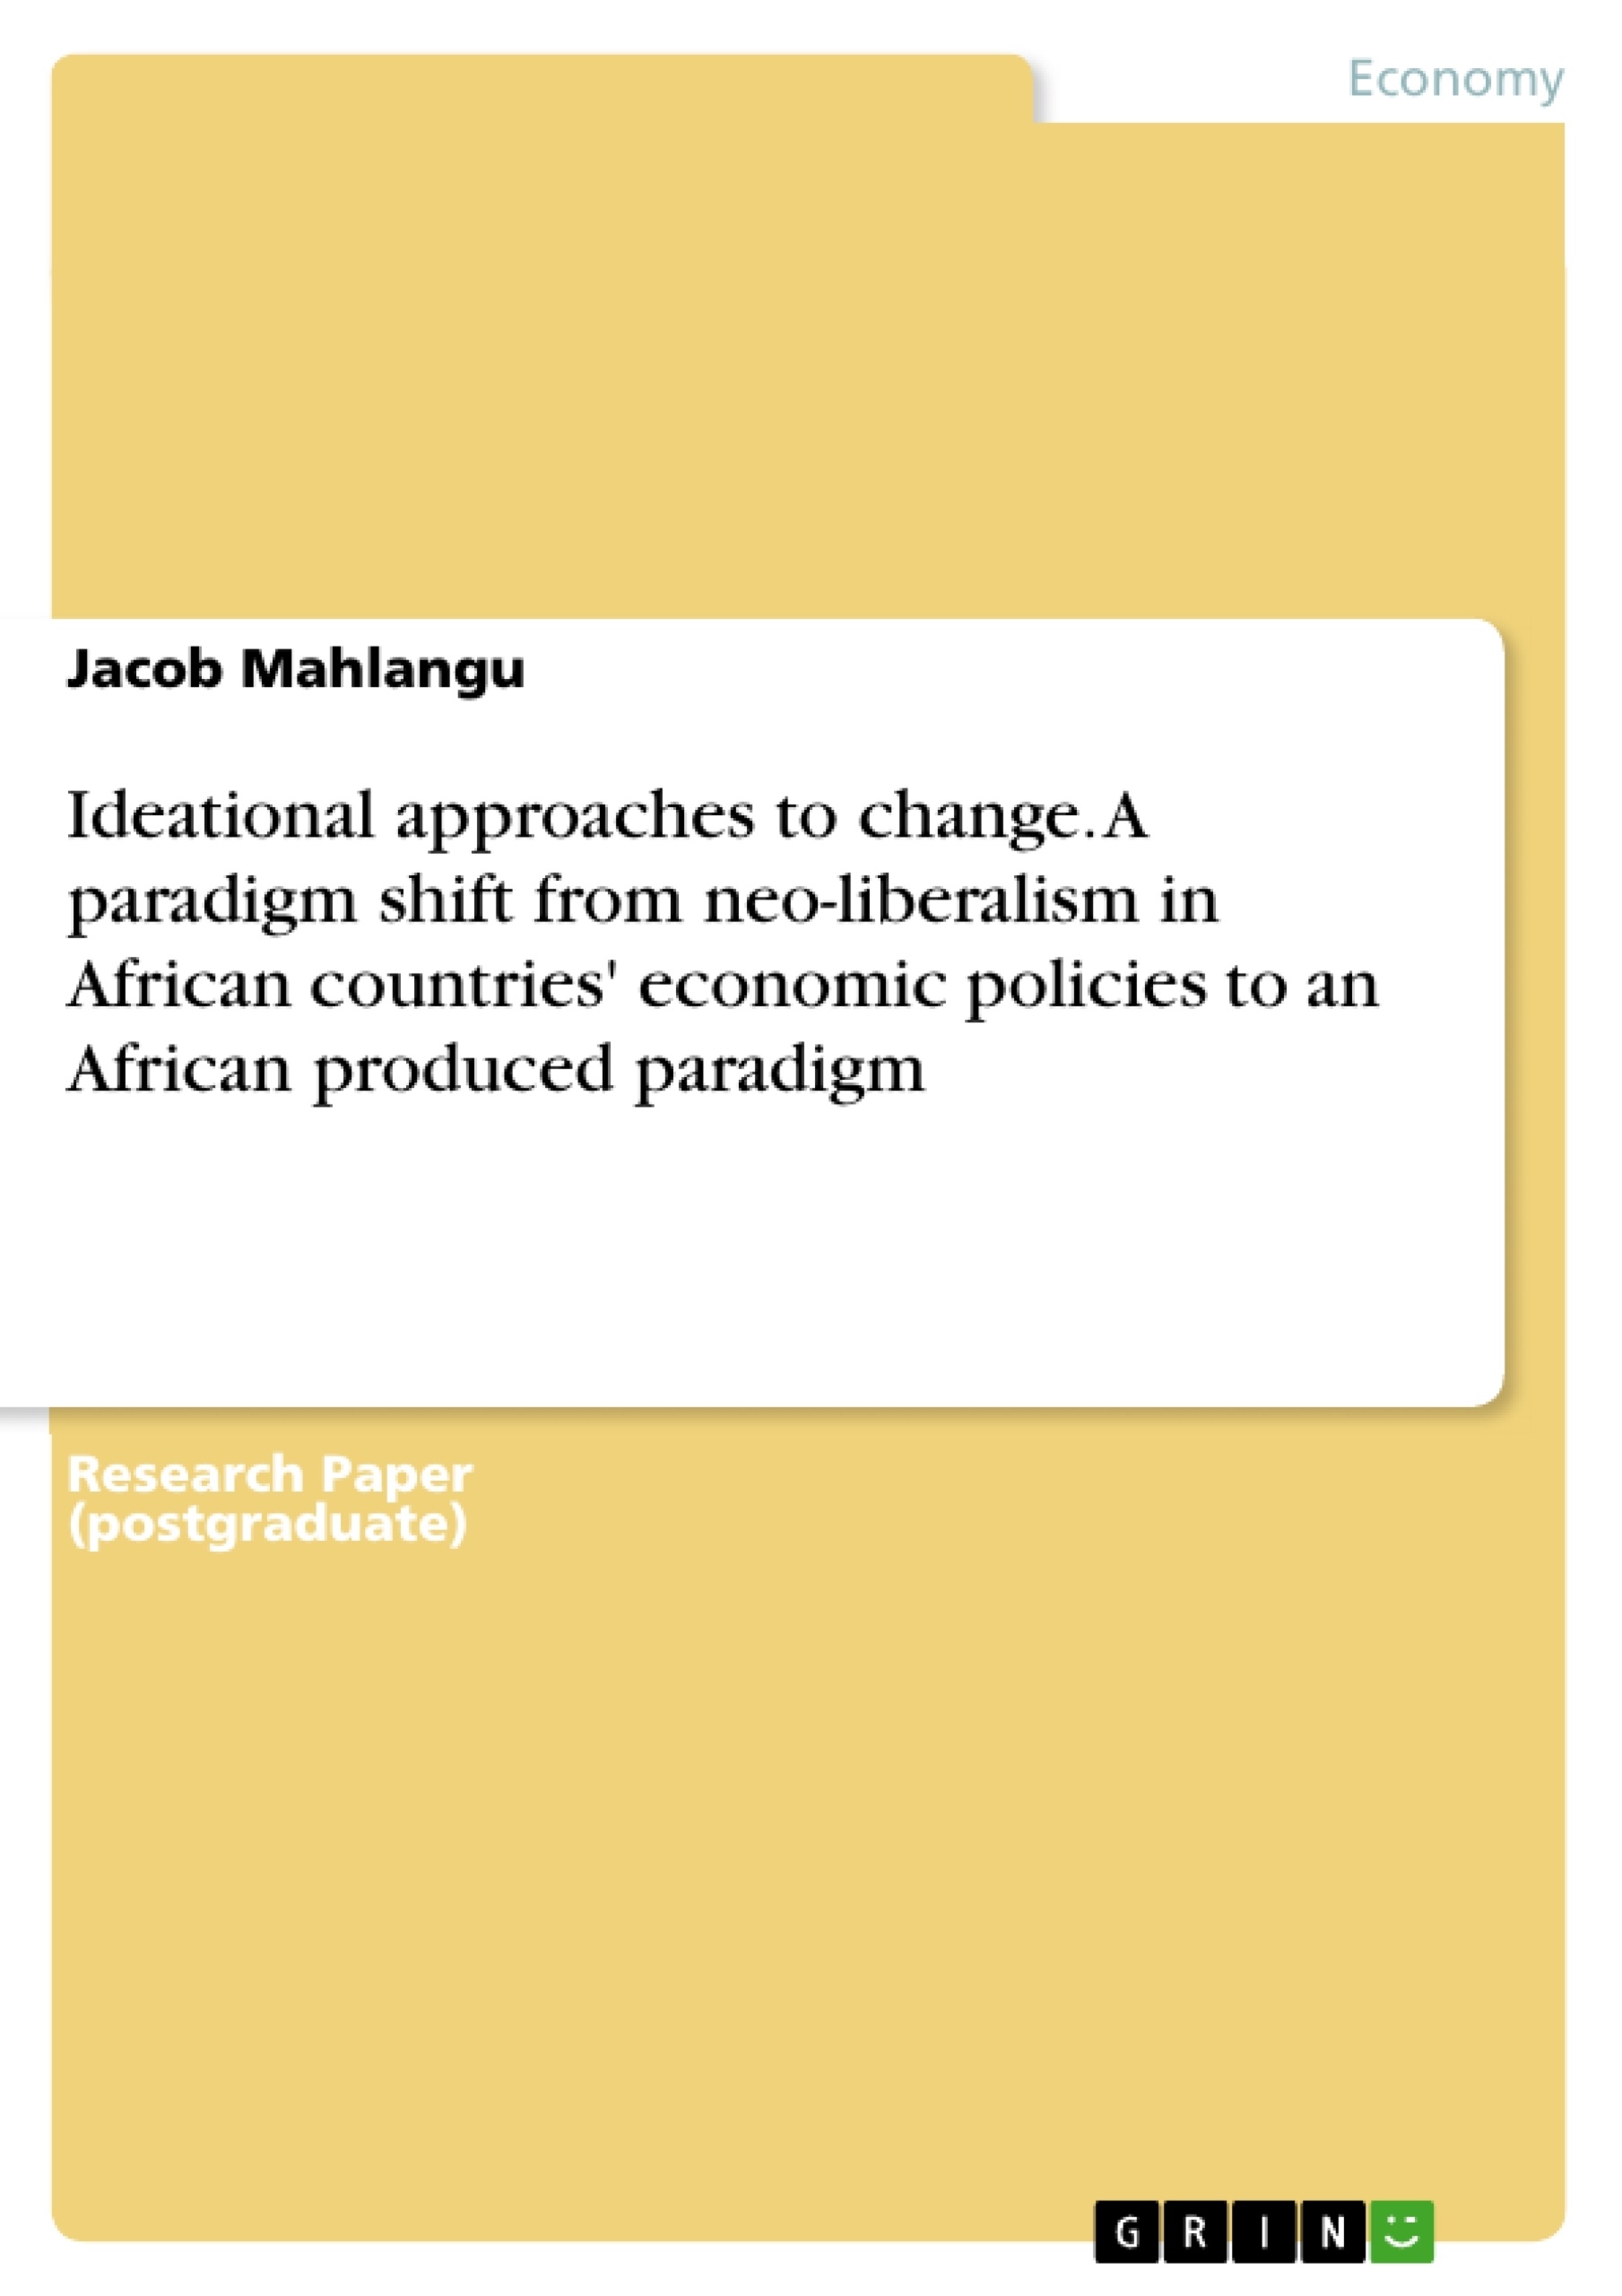 Titel: Ideational approaches to change. A paradigm shift from neo-liberalism in African countries' economic policies to an African produced paradigm